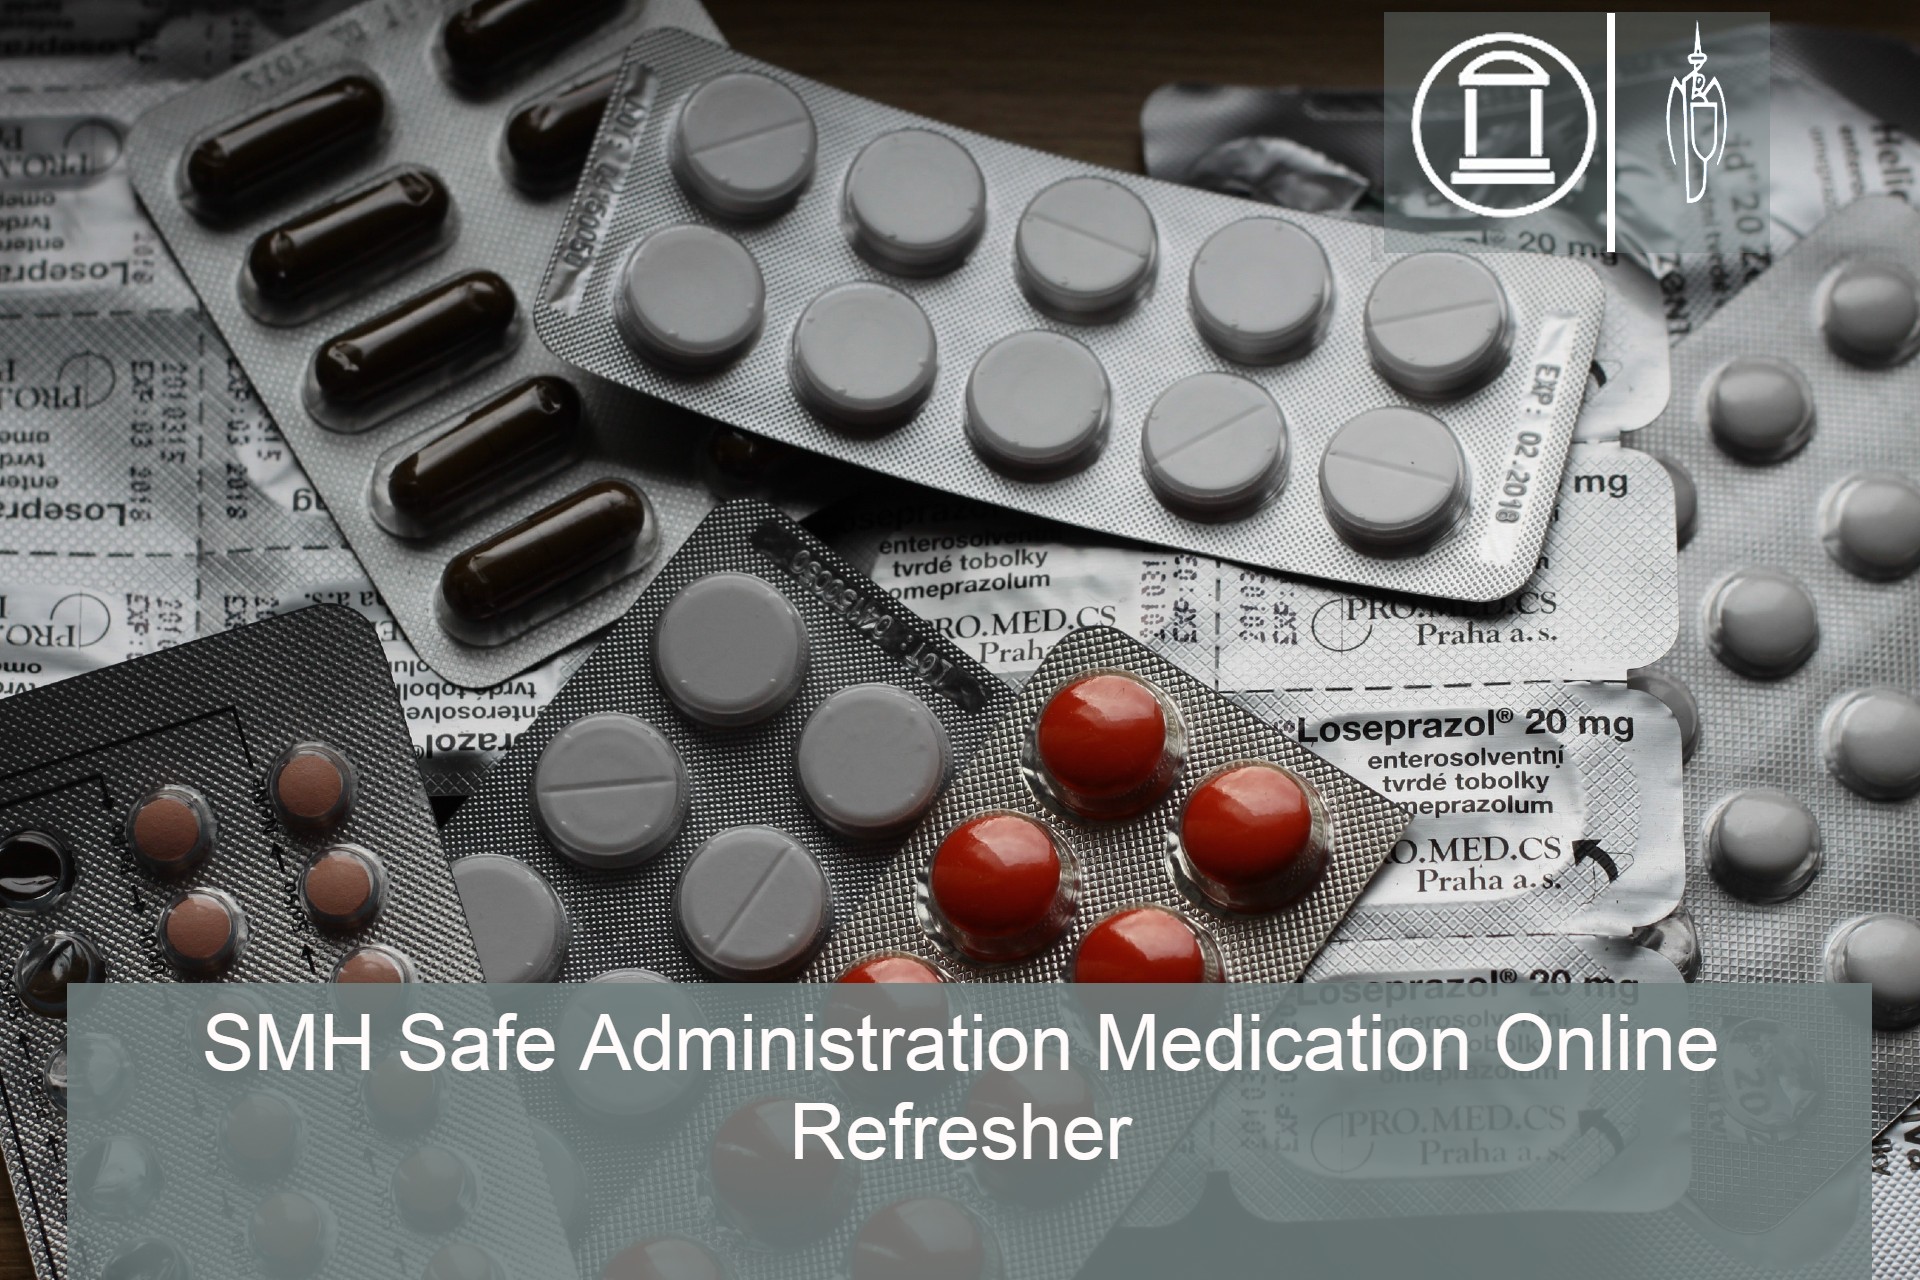 SMH Safe Administration Medication Online Refresher (Non Nursing Staff) - Access to this course is by invite only from the Staff Education, Training and Development Department